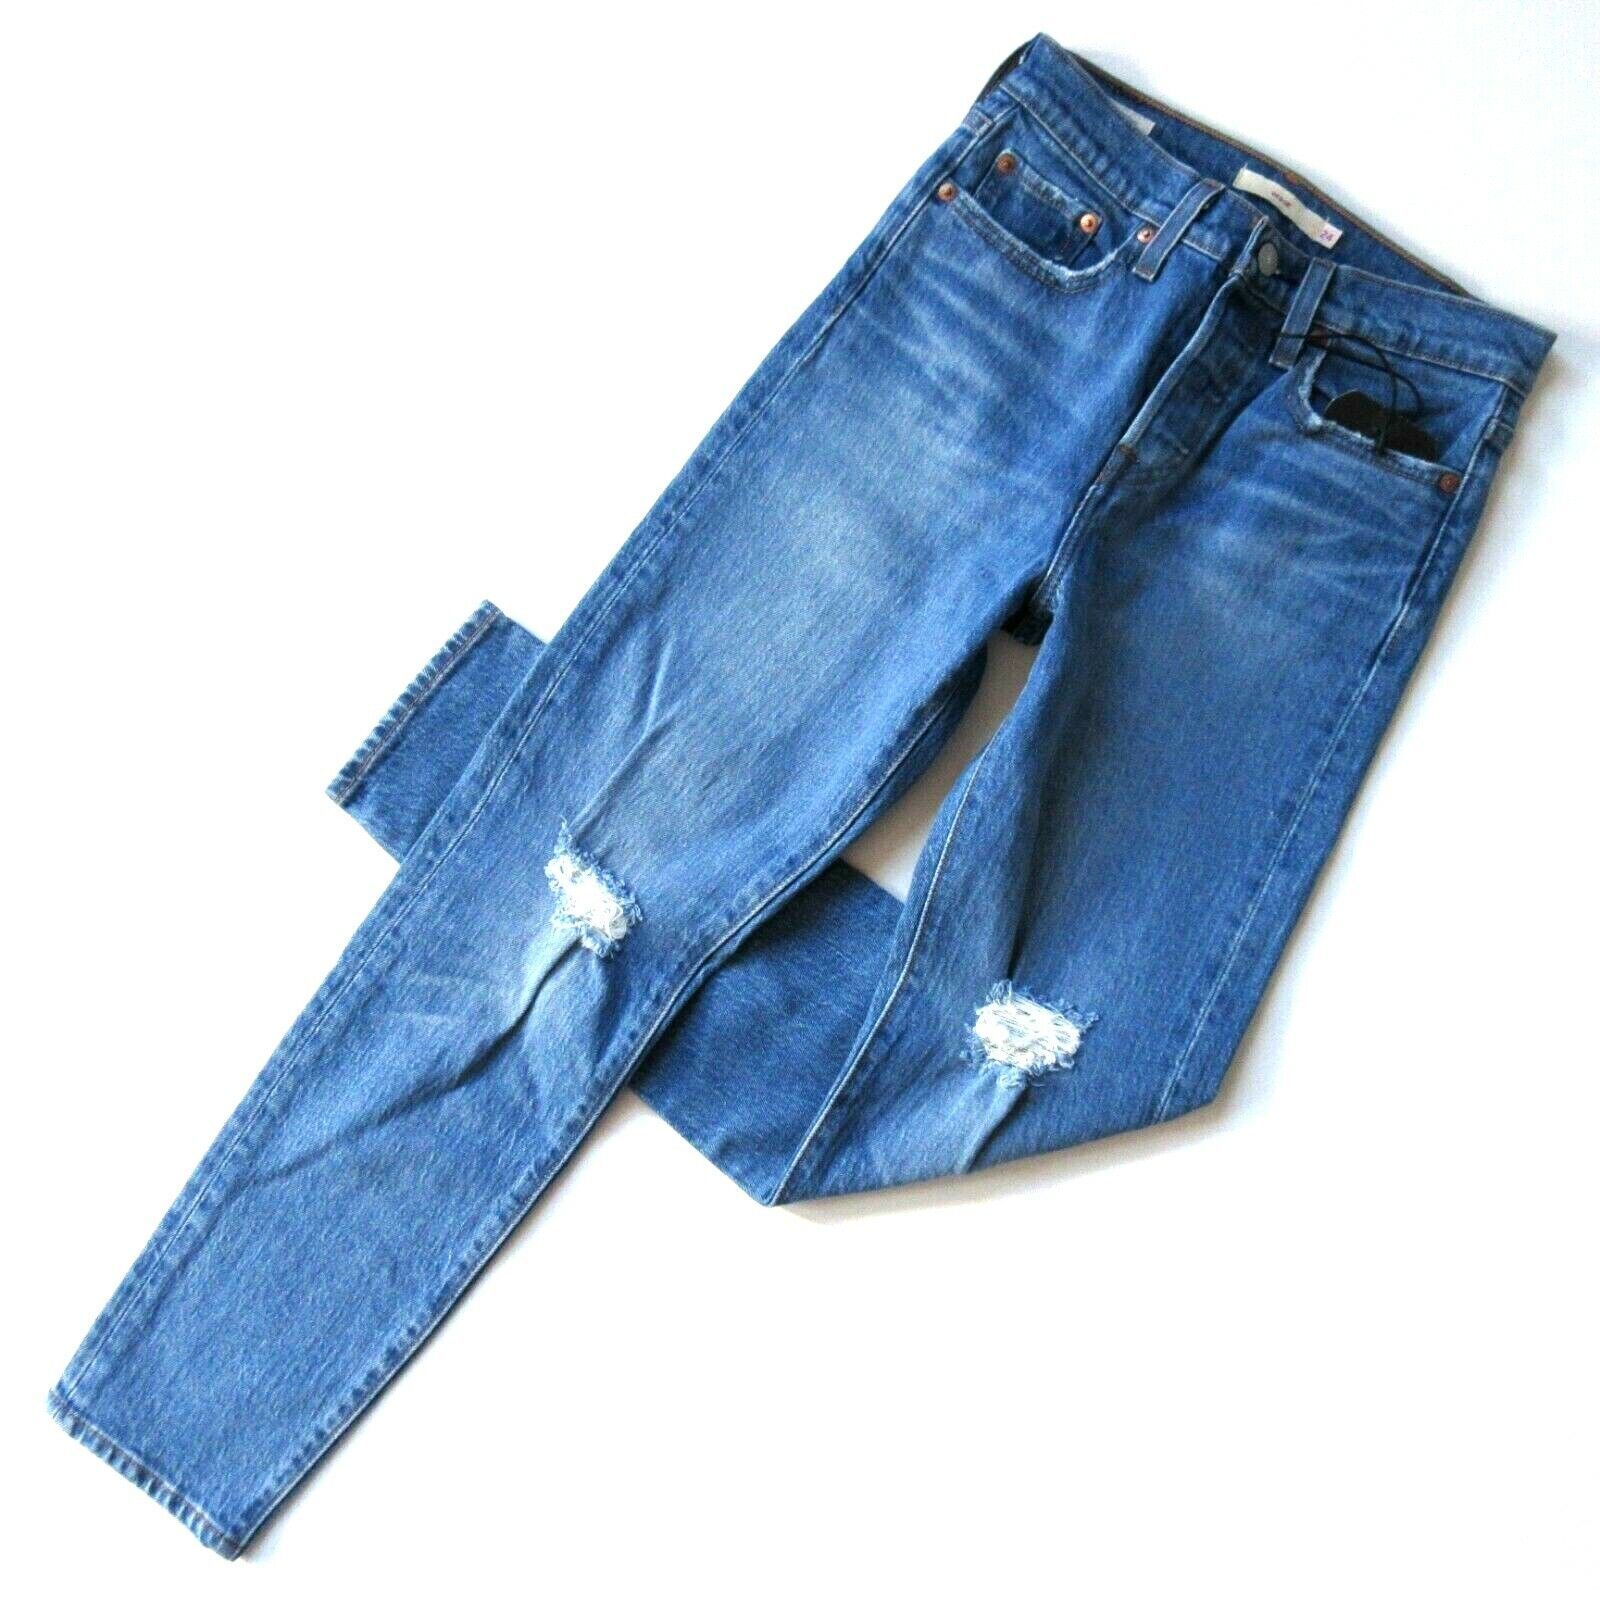 Primary image for NWT Levi's Wedgie in Charleston Breeze High Rise Tapered Leg Stretch Jeans 24